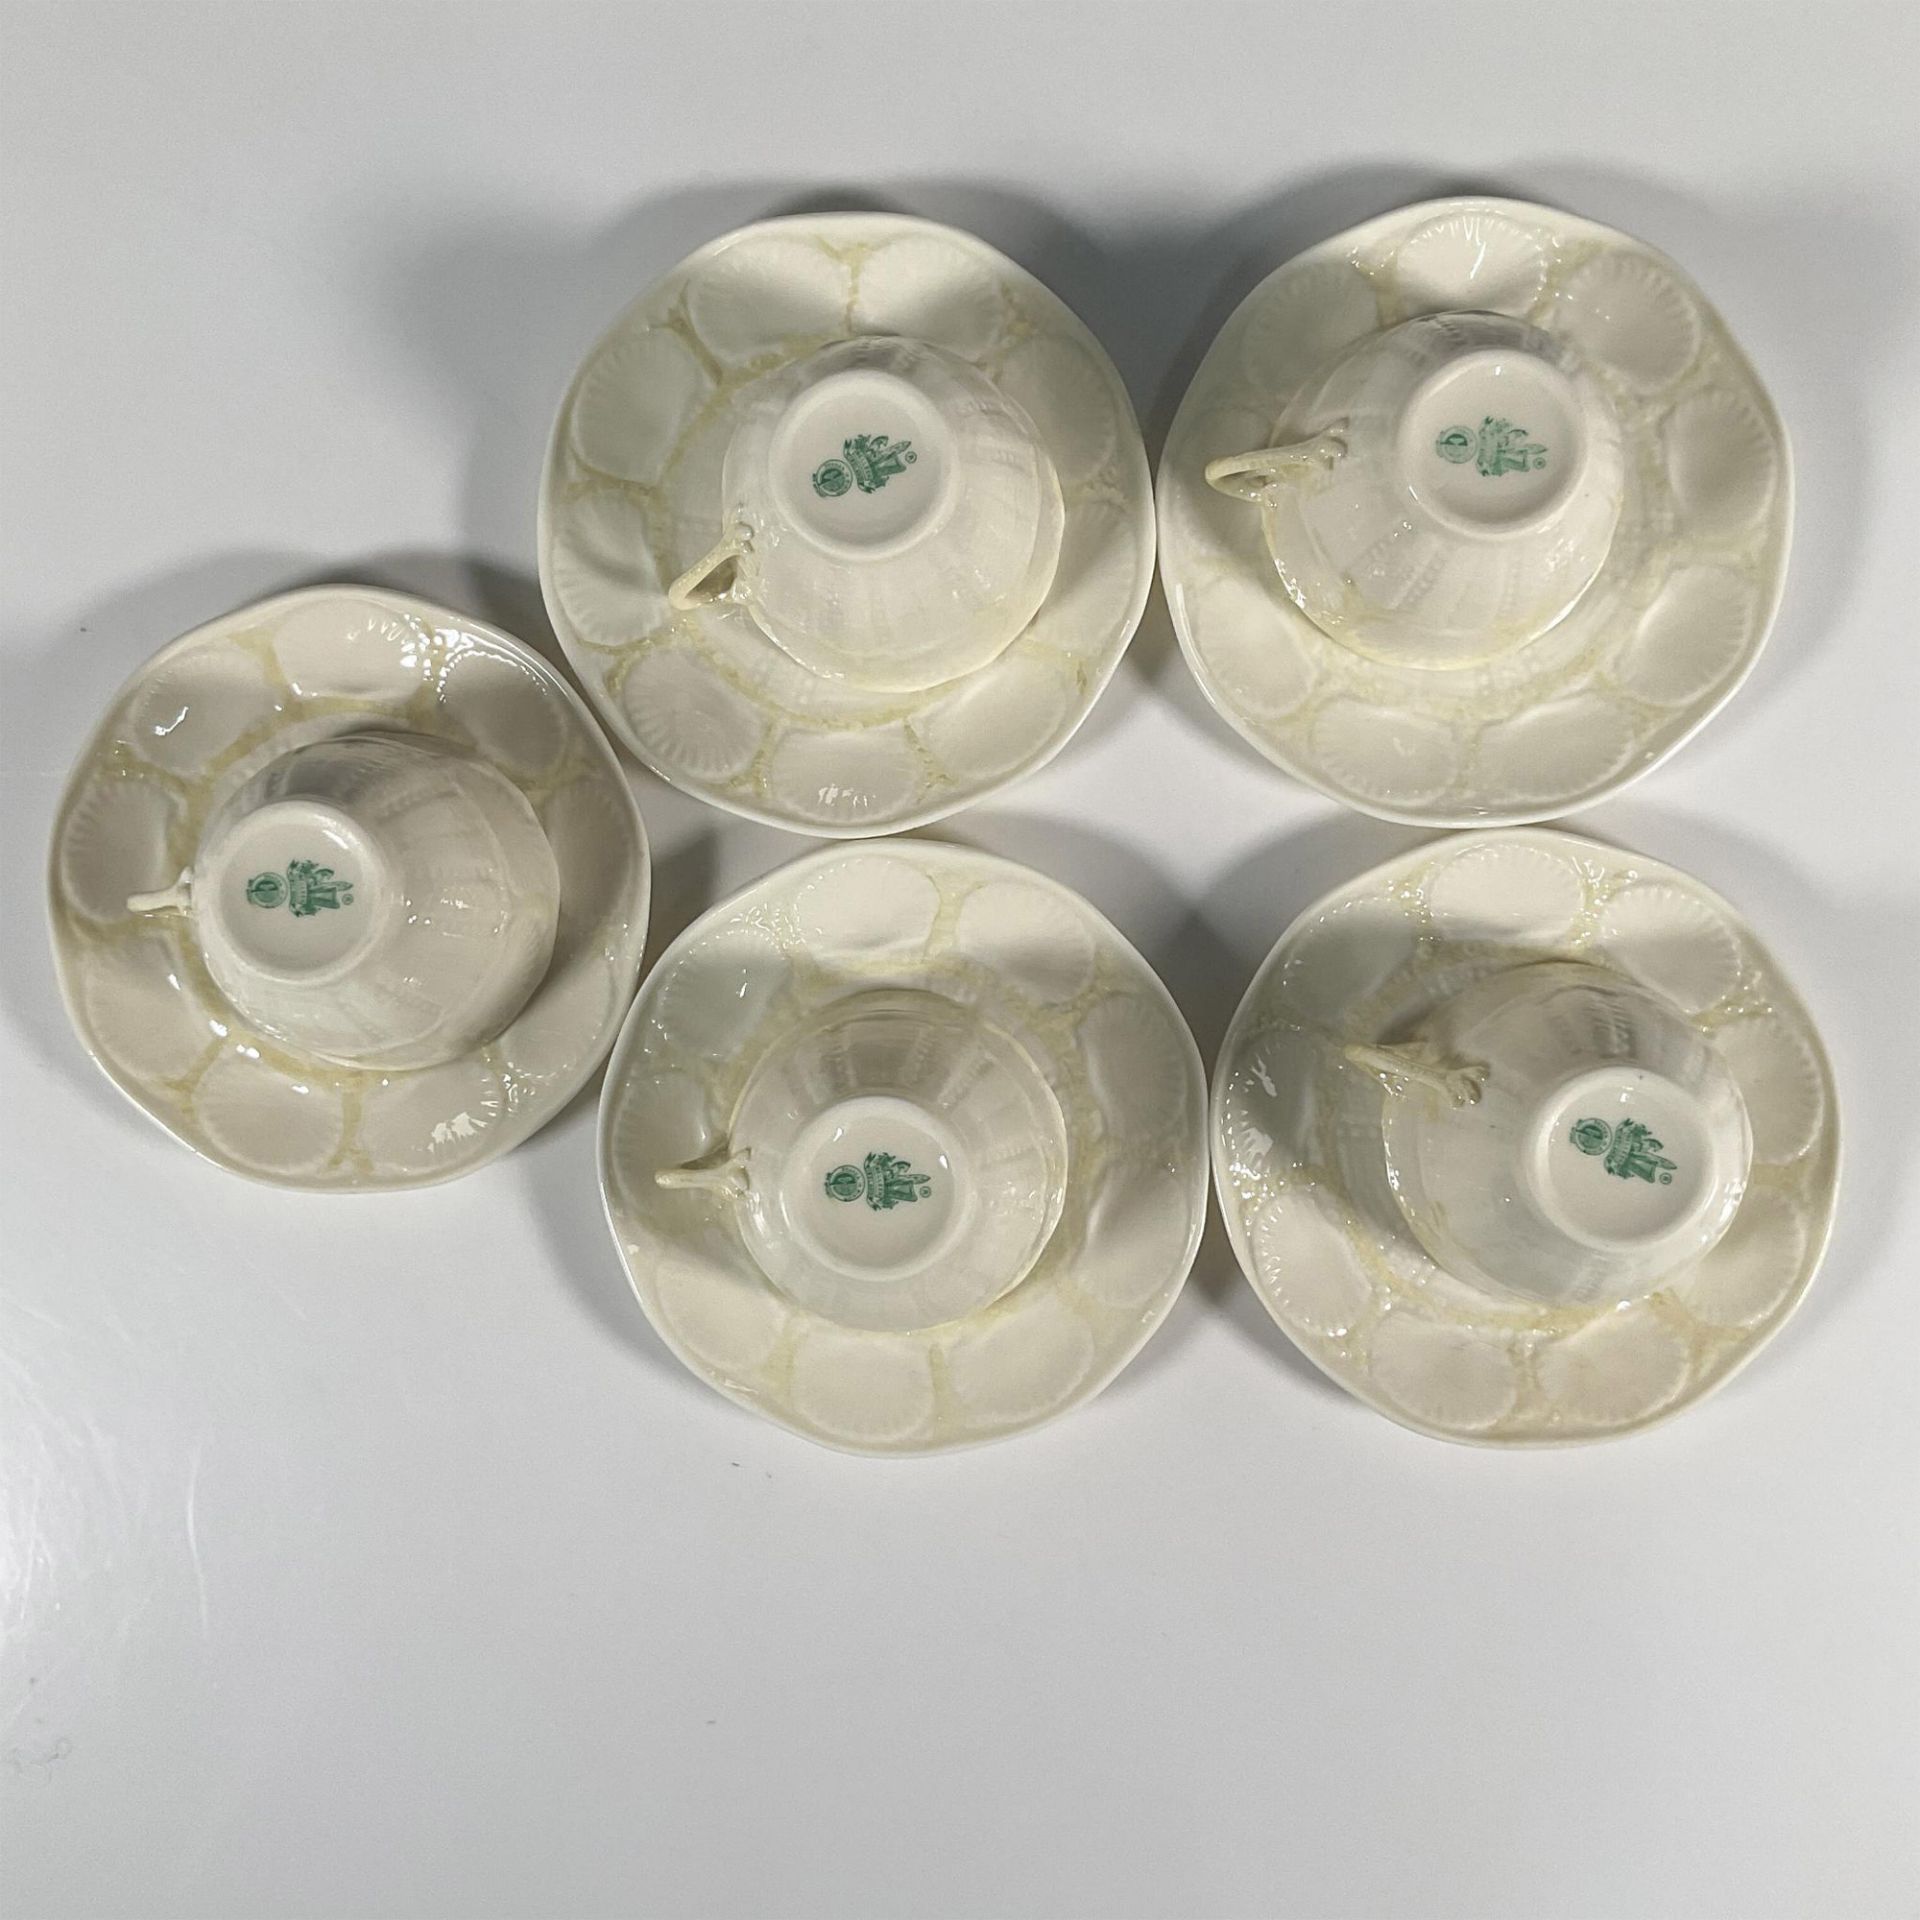 10pc Belleek Pottery Porcelain Cup and Saucer Set, New Shell - Image 3 of 4